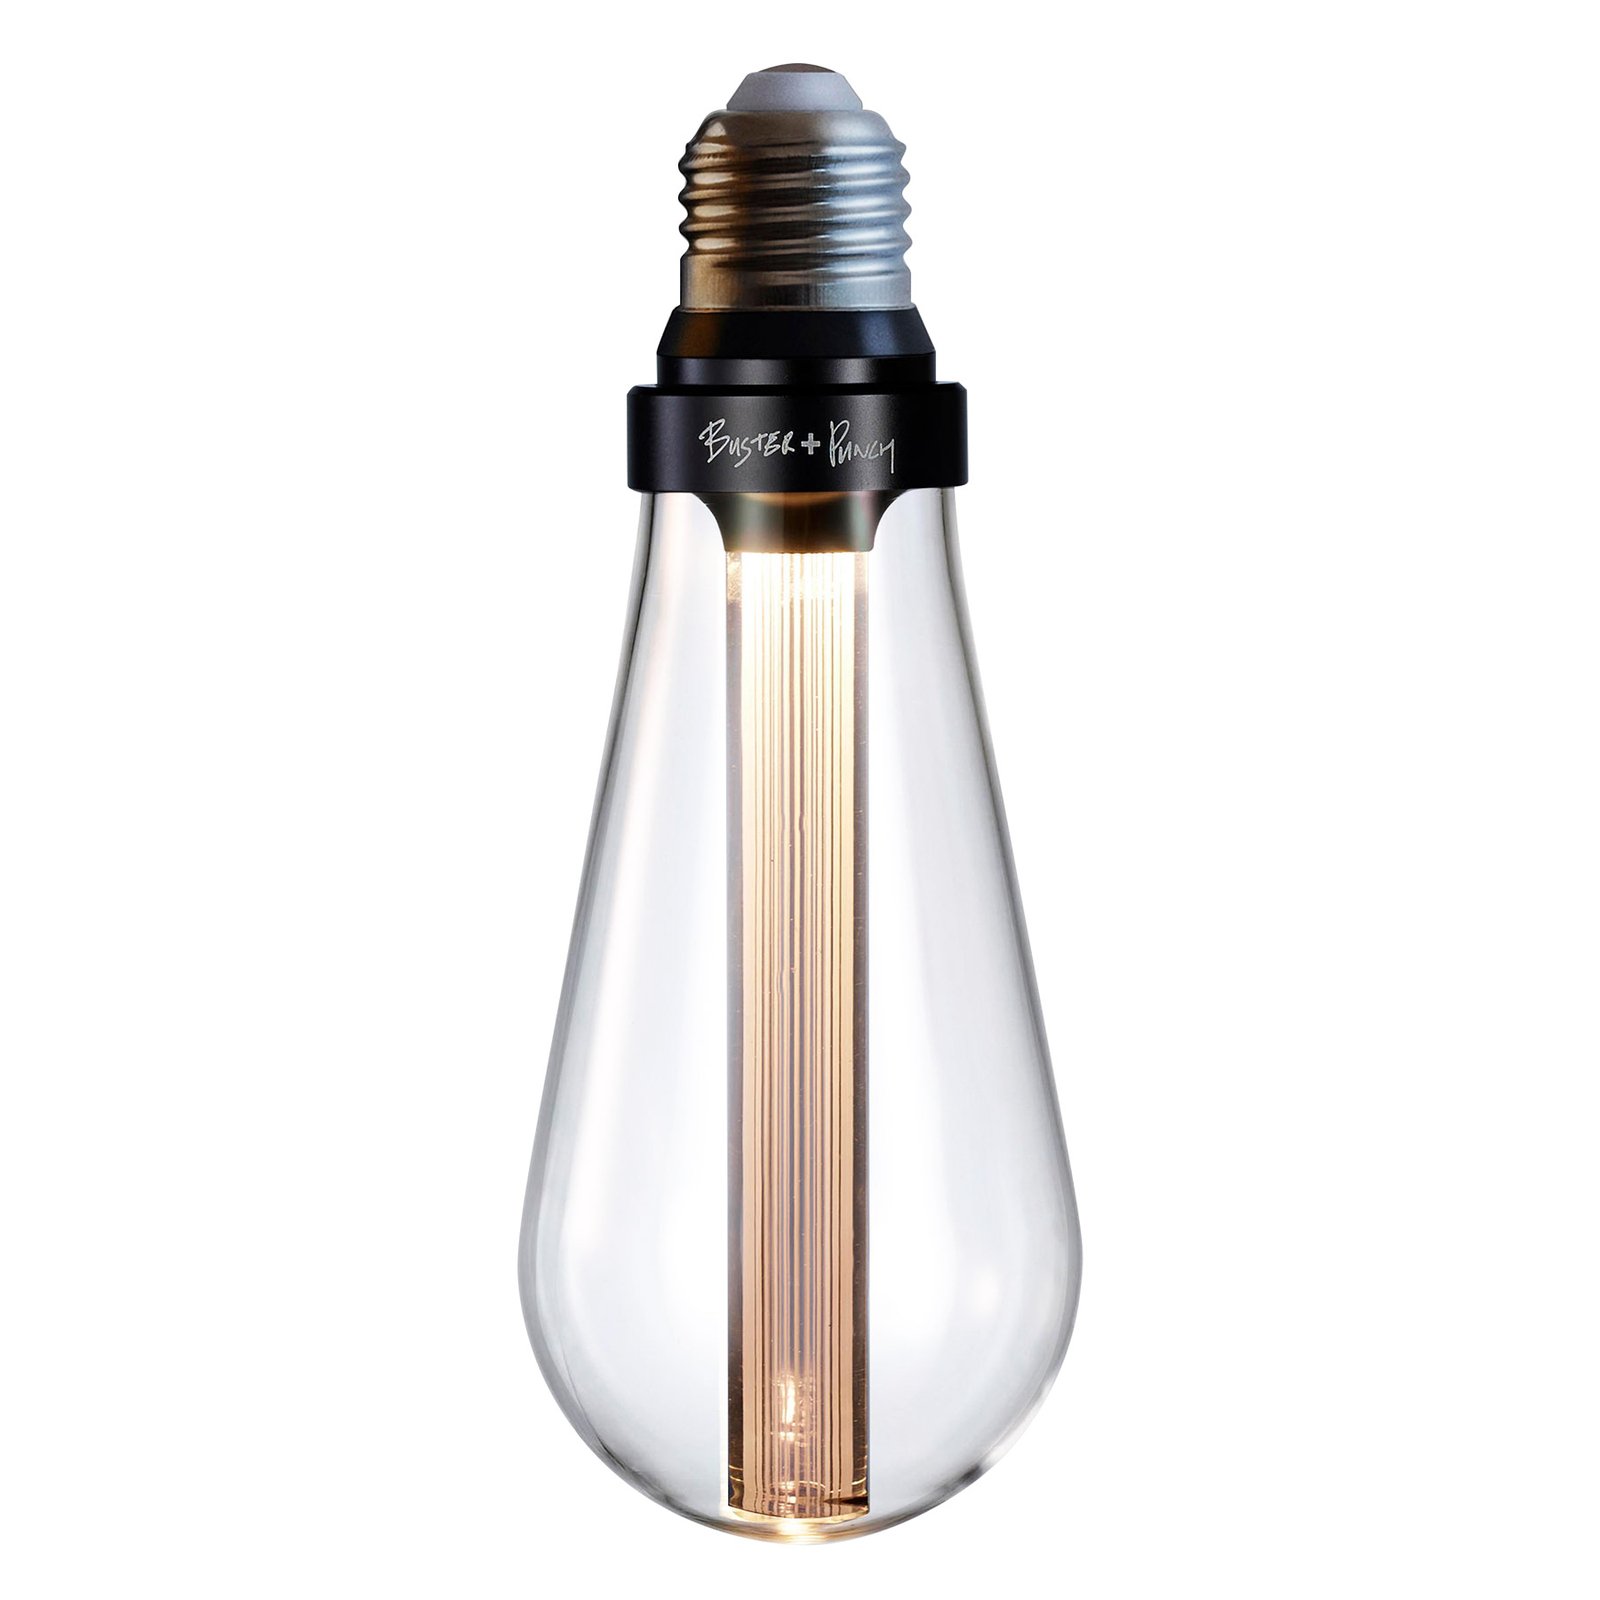 Buster + Punch LED-pære E27 2W dimbar crystal